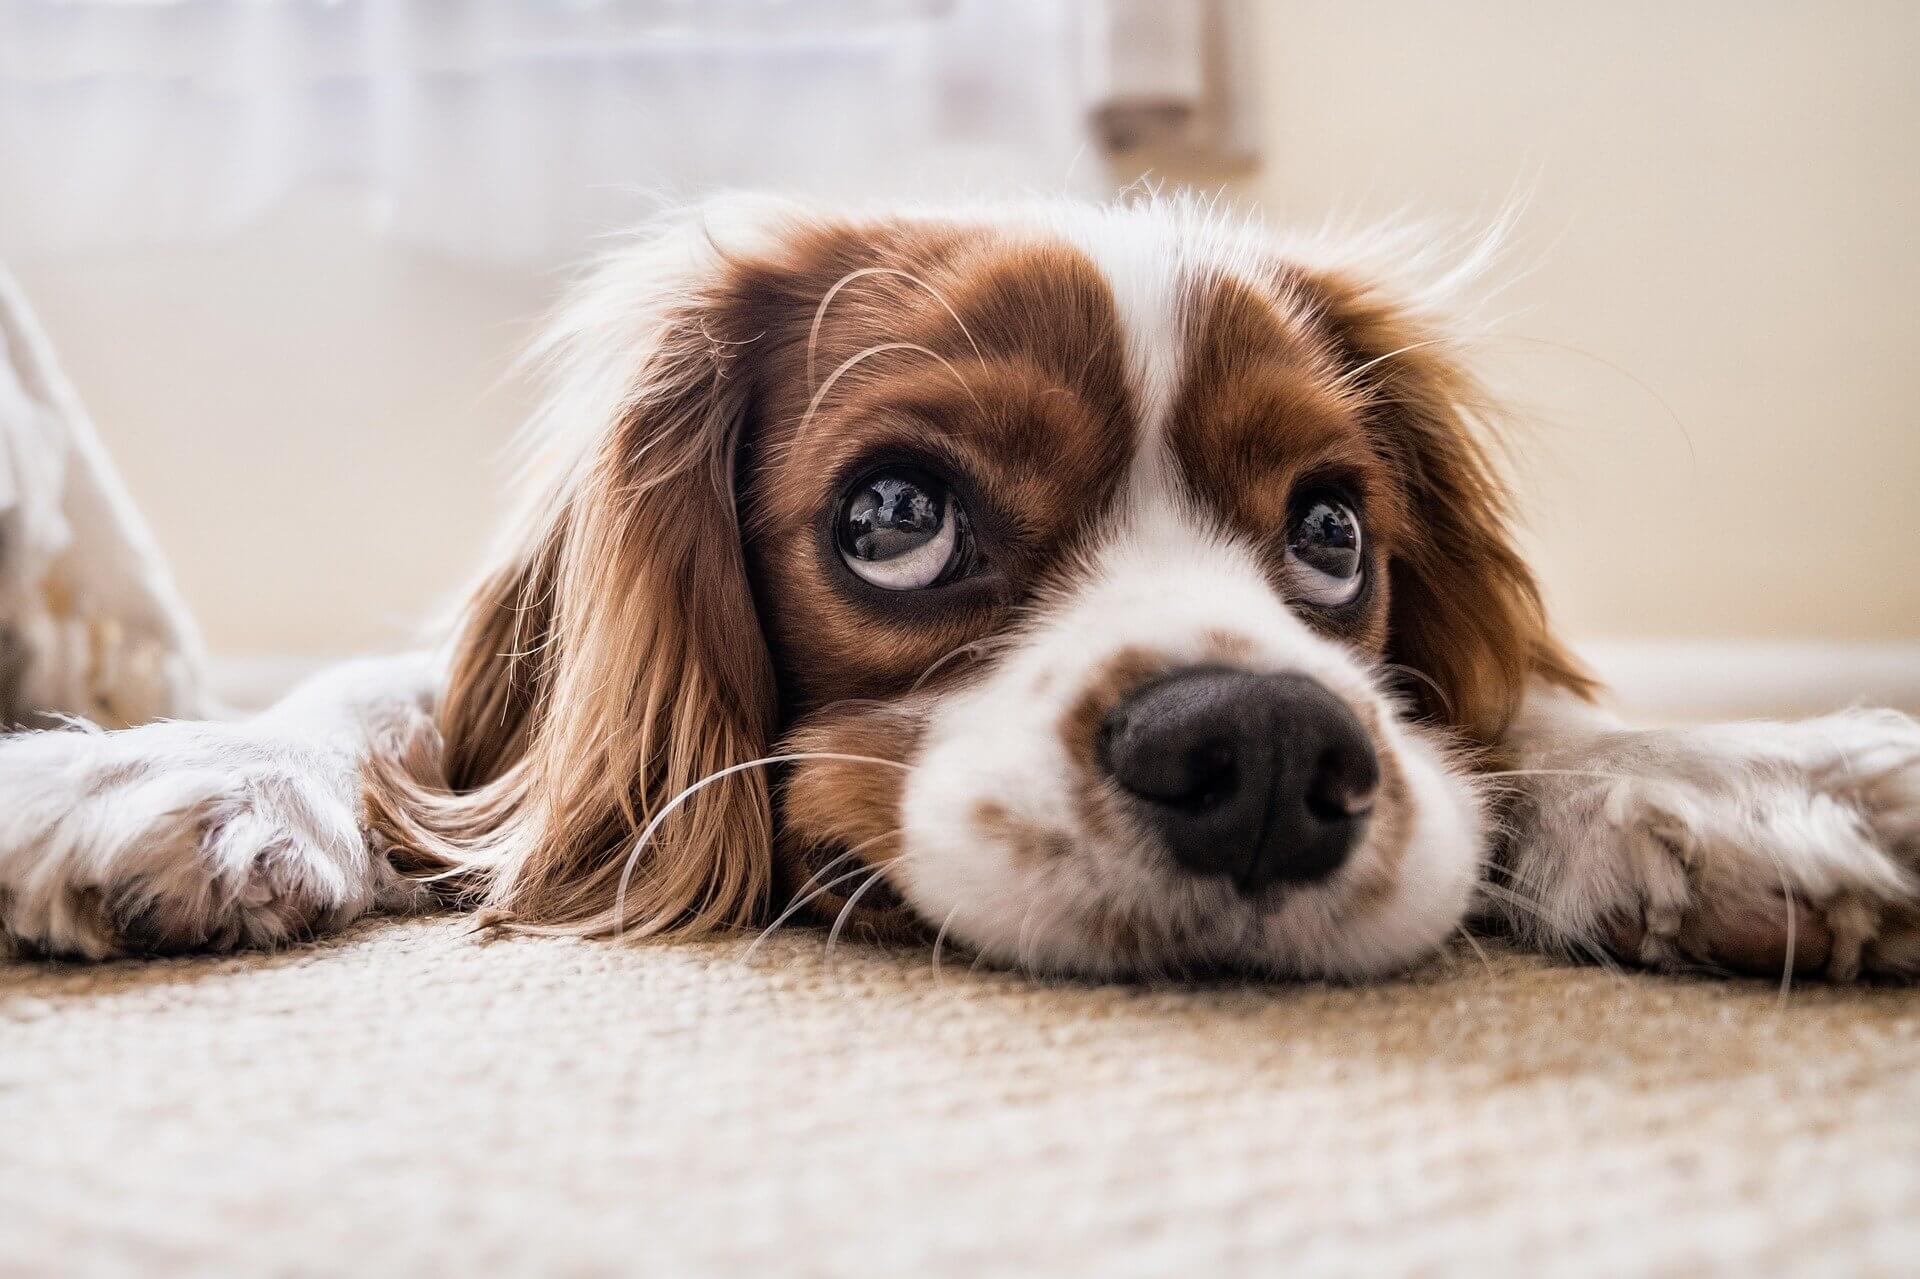 3 Simple Ways to Comfort Your Dogs During the Fireworks